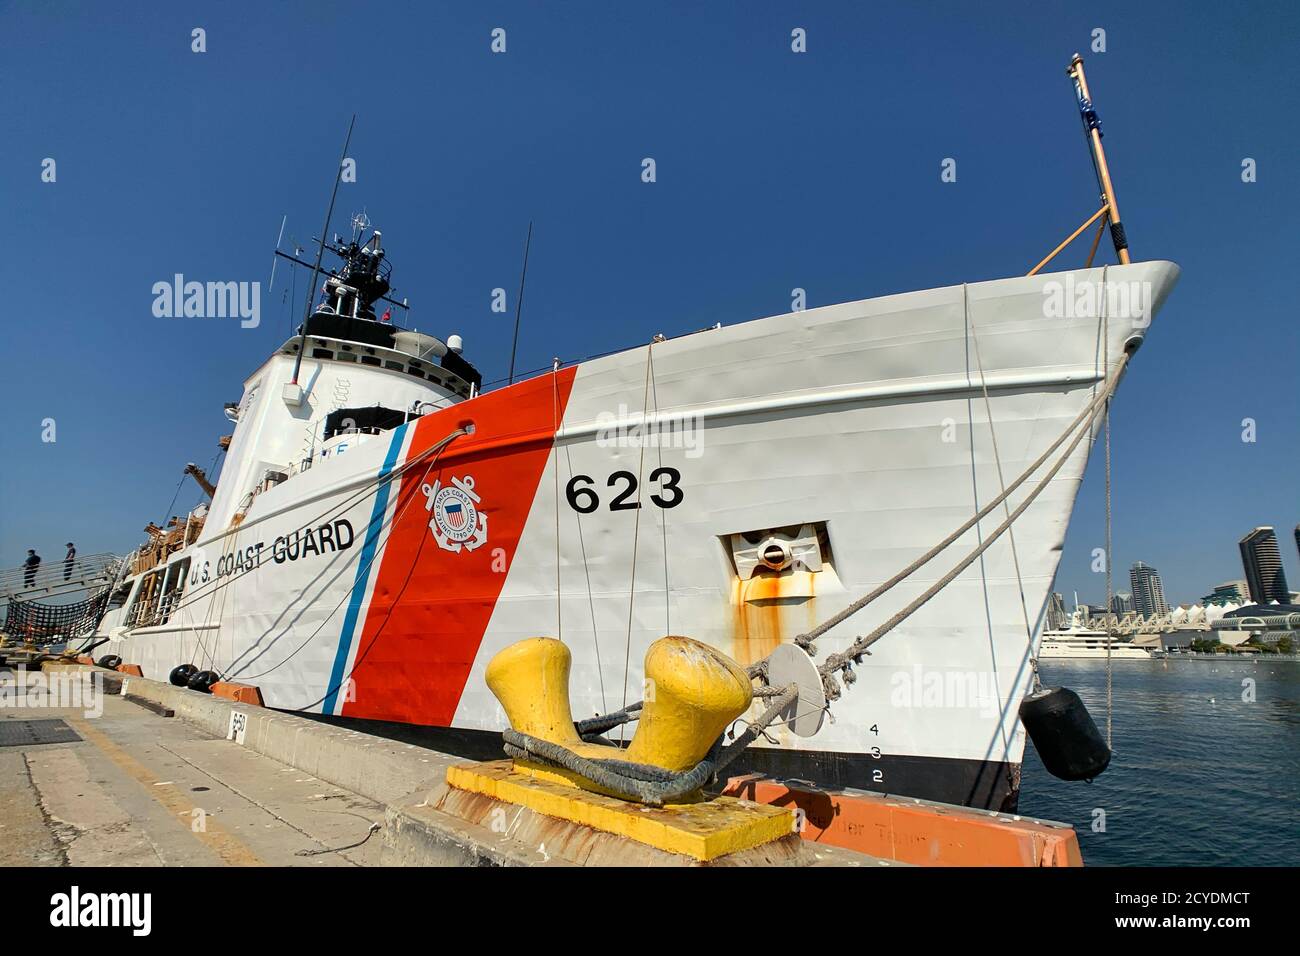 The Coast Guard Cutter Steadfast (WMEC-623) is seen at the Port of San Diego after the crew offloaded approximately 3,905 pounds of suspected cocaine in San Diego Oct. 1, 2020. The drugs, worth an estimated $67 million, were seized in international waters of the Eastern Pacific Ocean and represent two suspected drug smuggling vessel interdictions off the coasts of Mexico, Central and South America in early September by the Steadfast crew. (U.S. Coast guard photo) Stock Photo